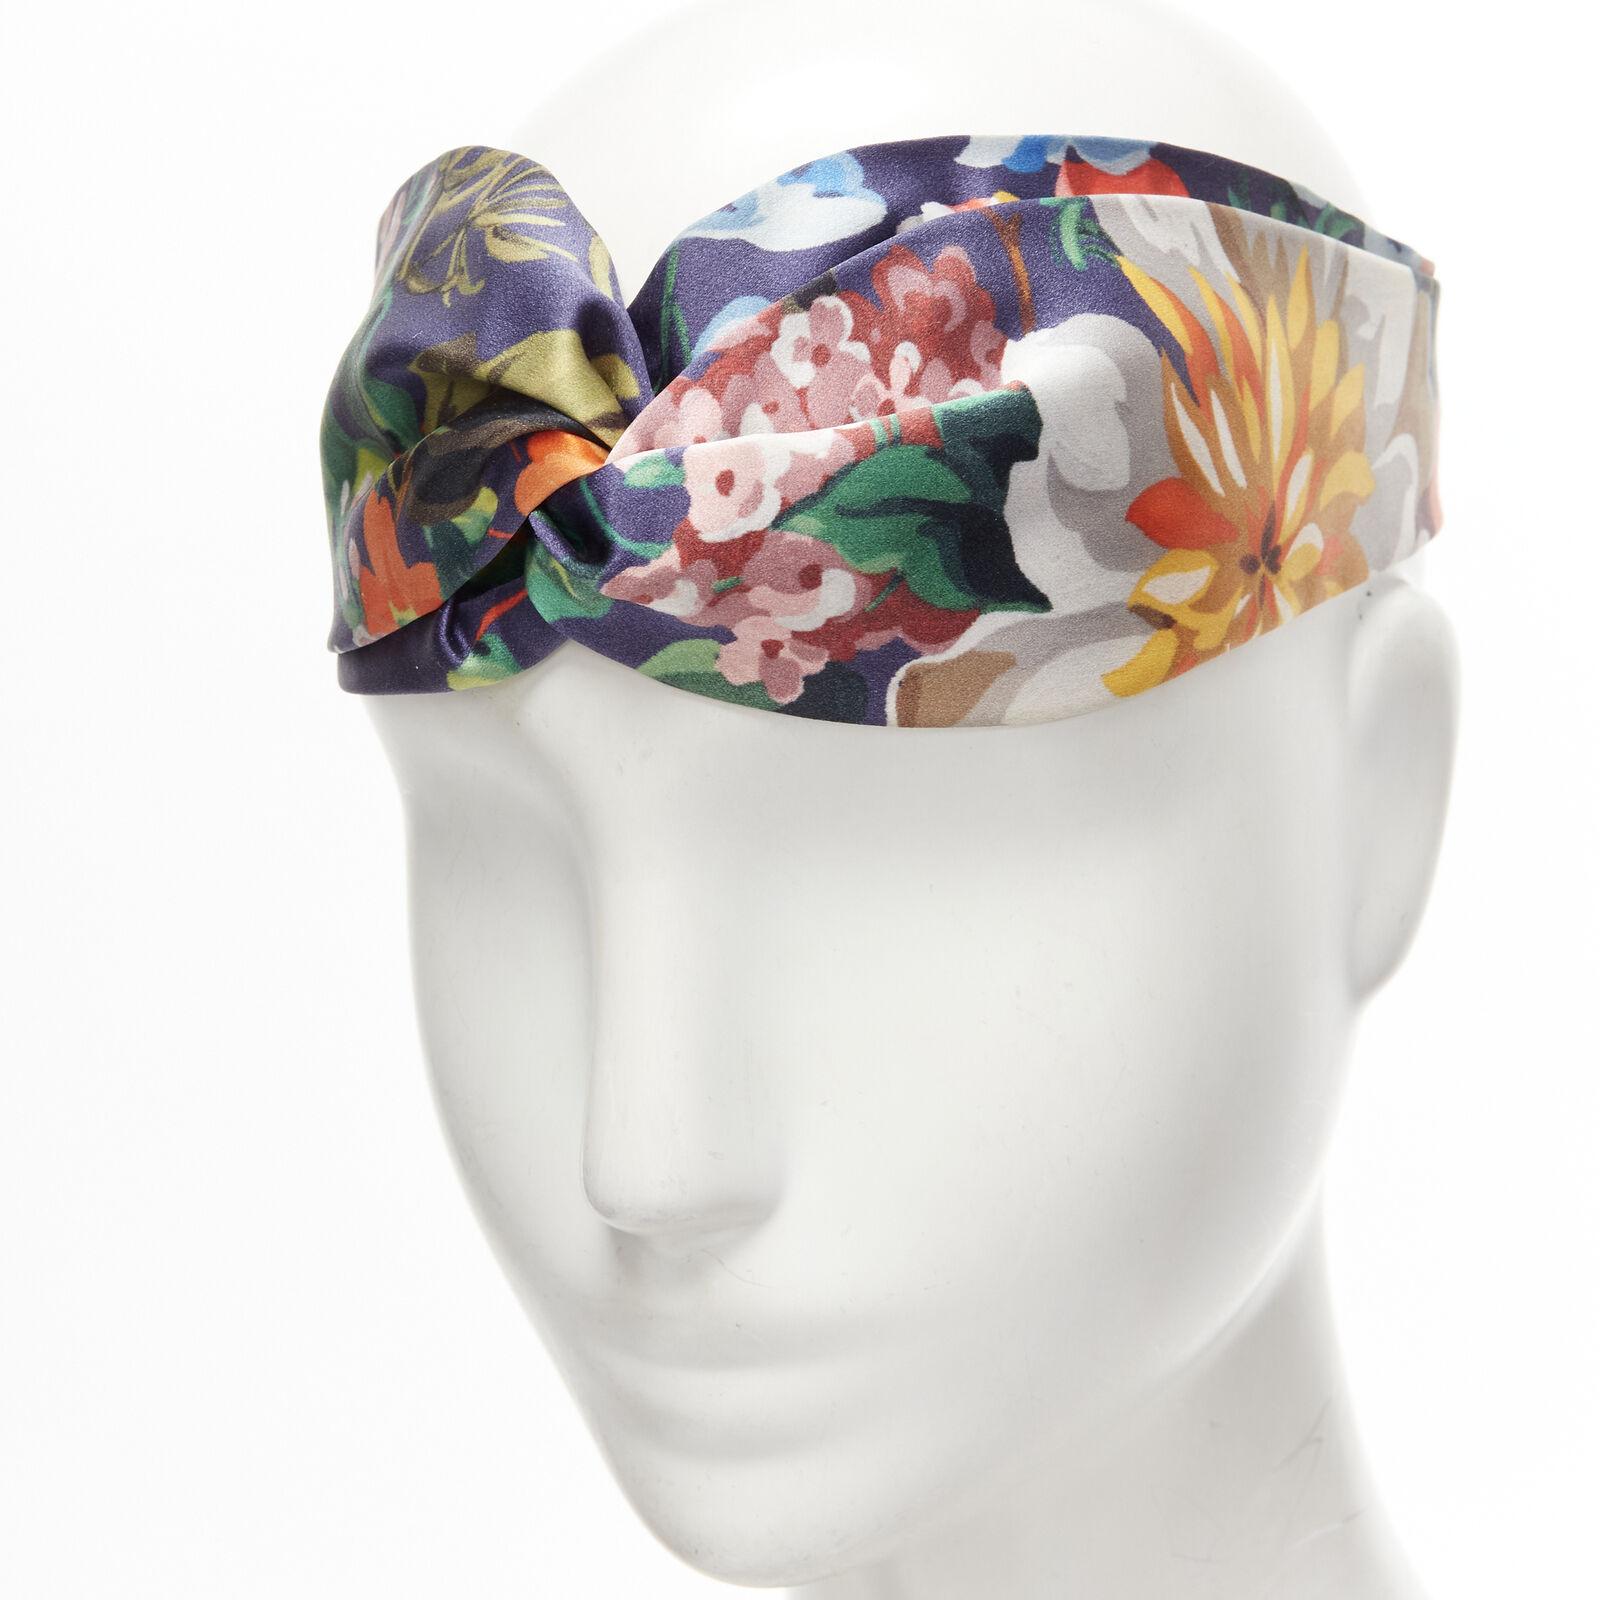 GUCCI Bloom 100% silk blue multi twist front turban style head scarf headband
Reference: LNKO/A02075
Brand: Gucci
Designer: Alessandro Michele
Collection: Bloom
Material: 100% Silk
Color: Multicolour
Pattern: Floral
Closure: Elasticated
Made in: